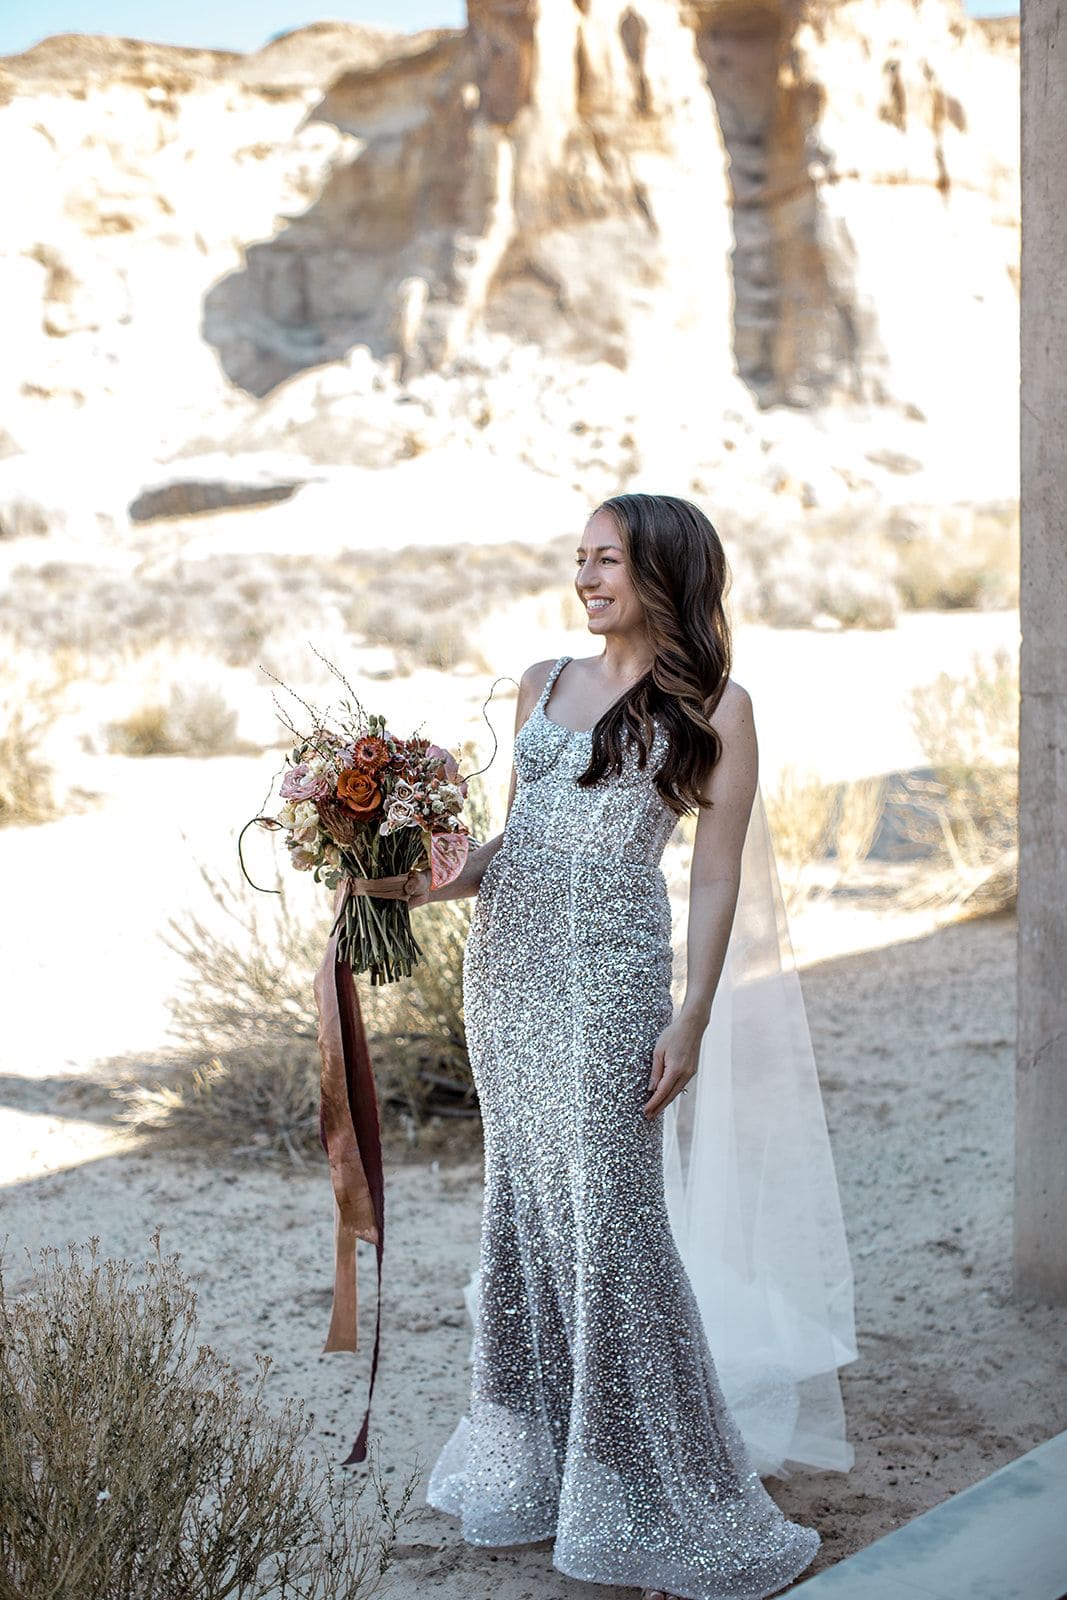 Bride wears sparkling fitted silhouette gown and holds bridal bouquet